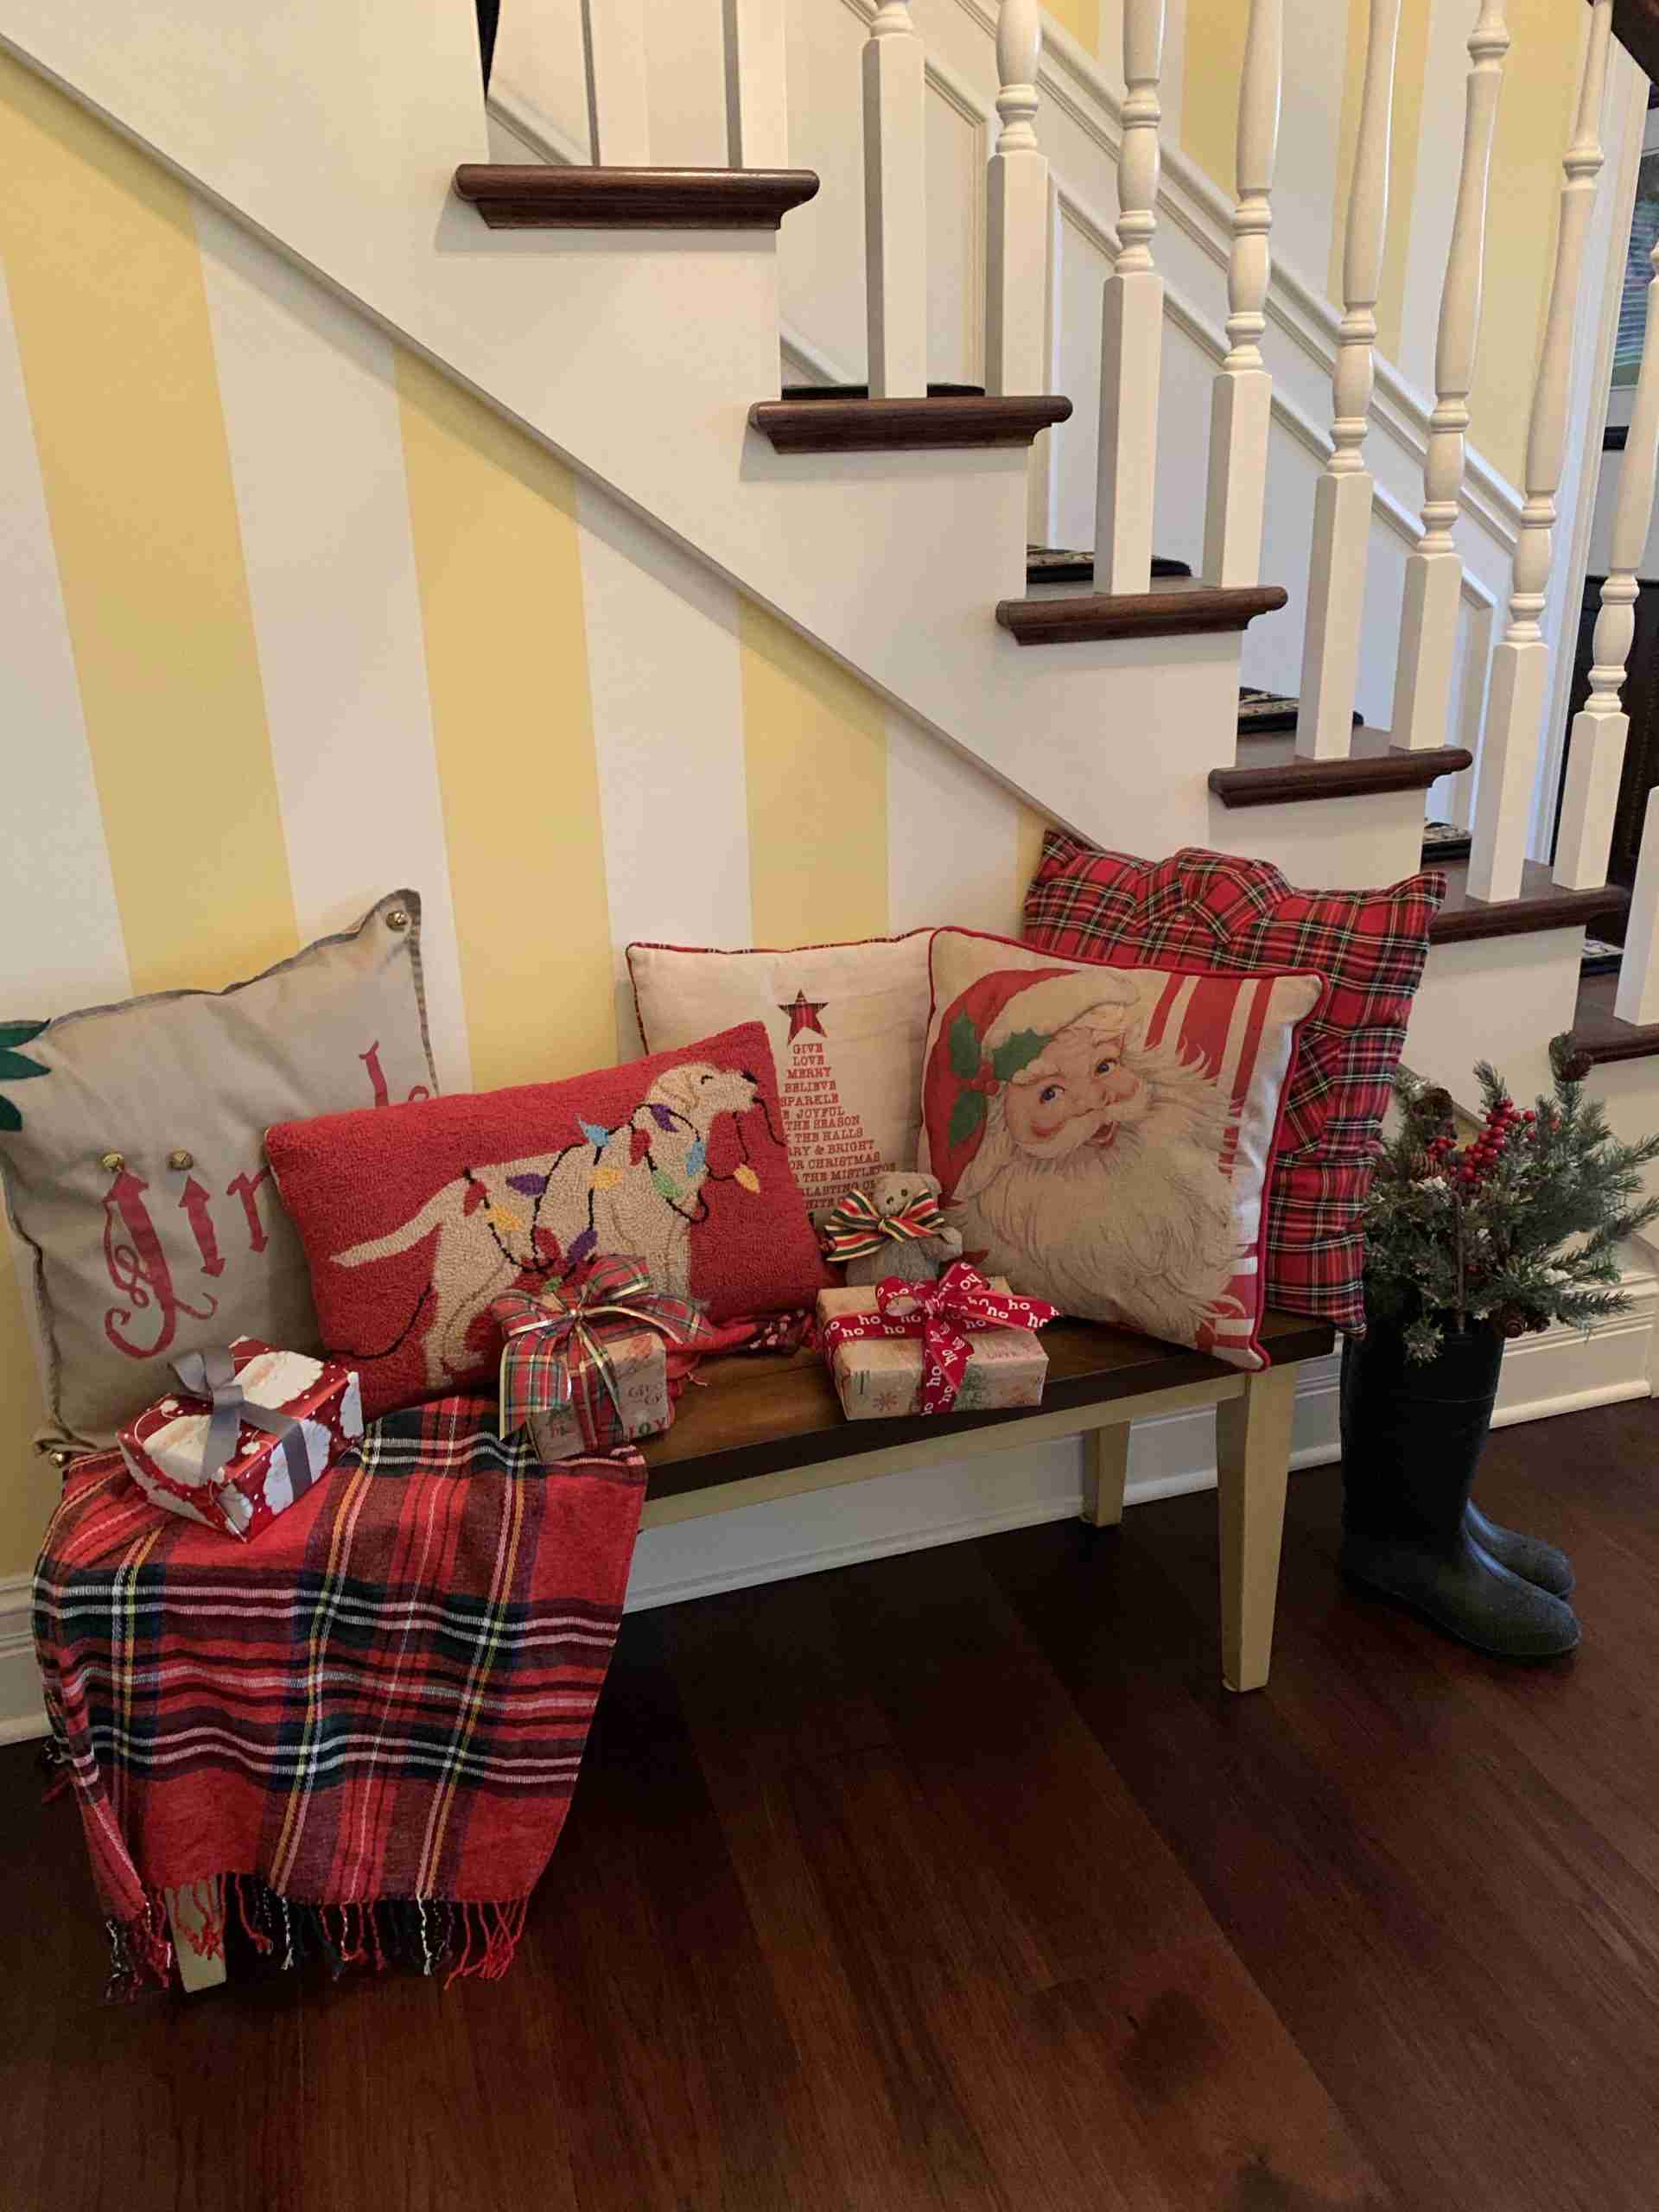 My front hall bench decorated with a red plaid throw, wrapped presents, and Christmas pillows.  And garden boots filled with holiday greenery.